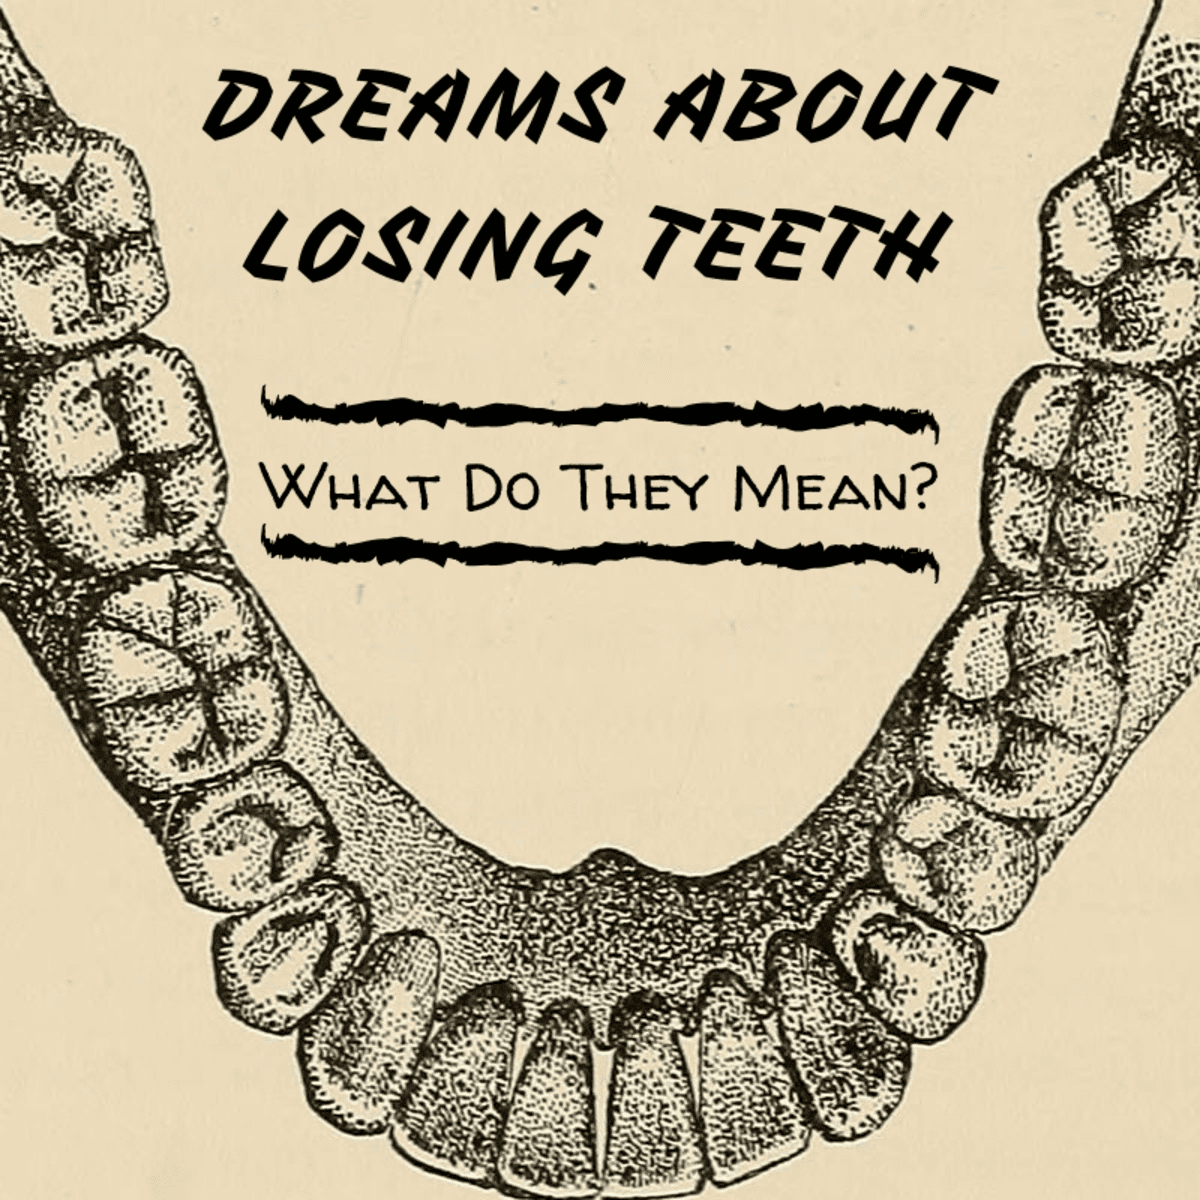 What Do Dreams About Teeth Falling Out Mean 6 Ways To Interpret A Common Nightmare Exemplore